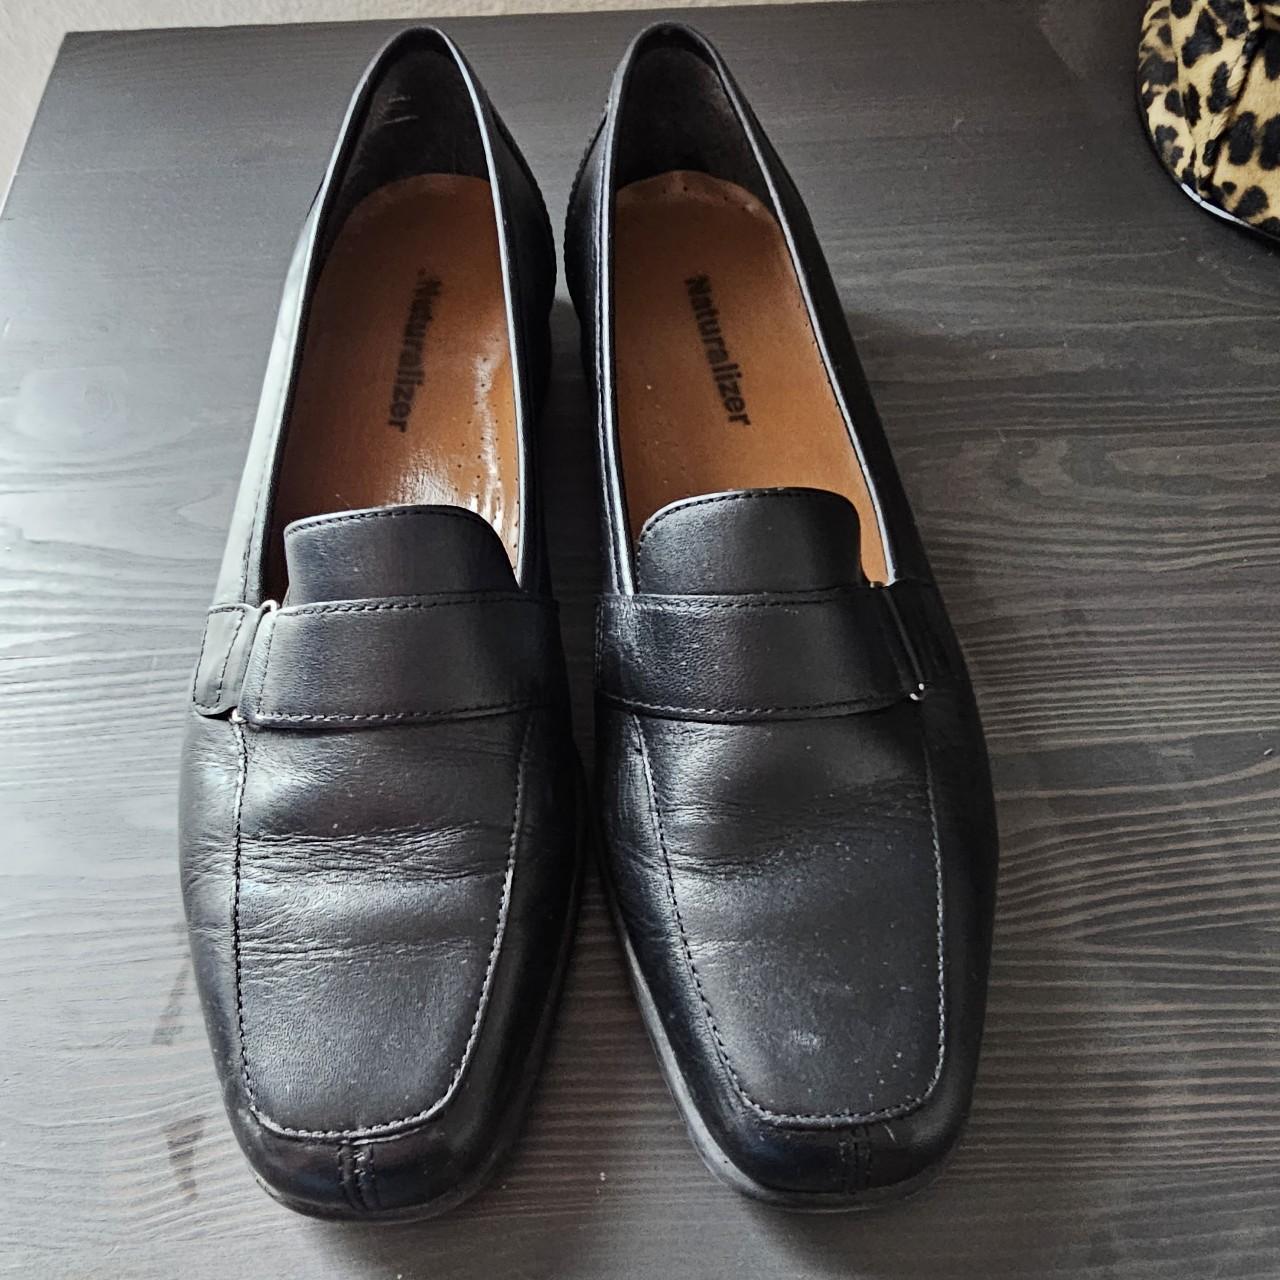 Black 90s Naturalizer loafers. Leather size 8.5 women's - Depop